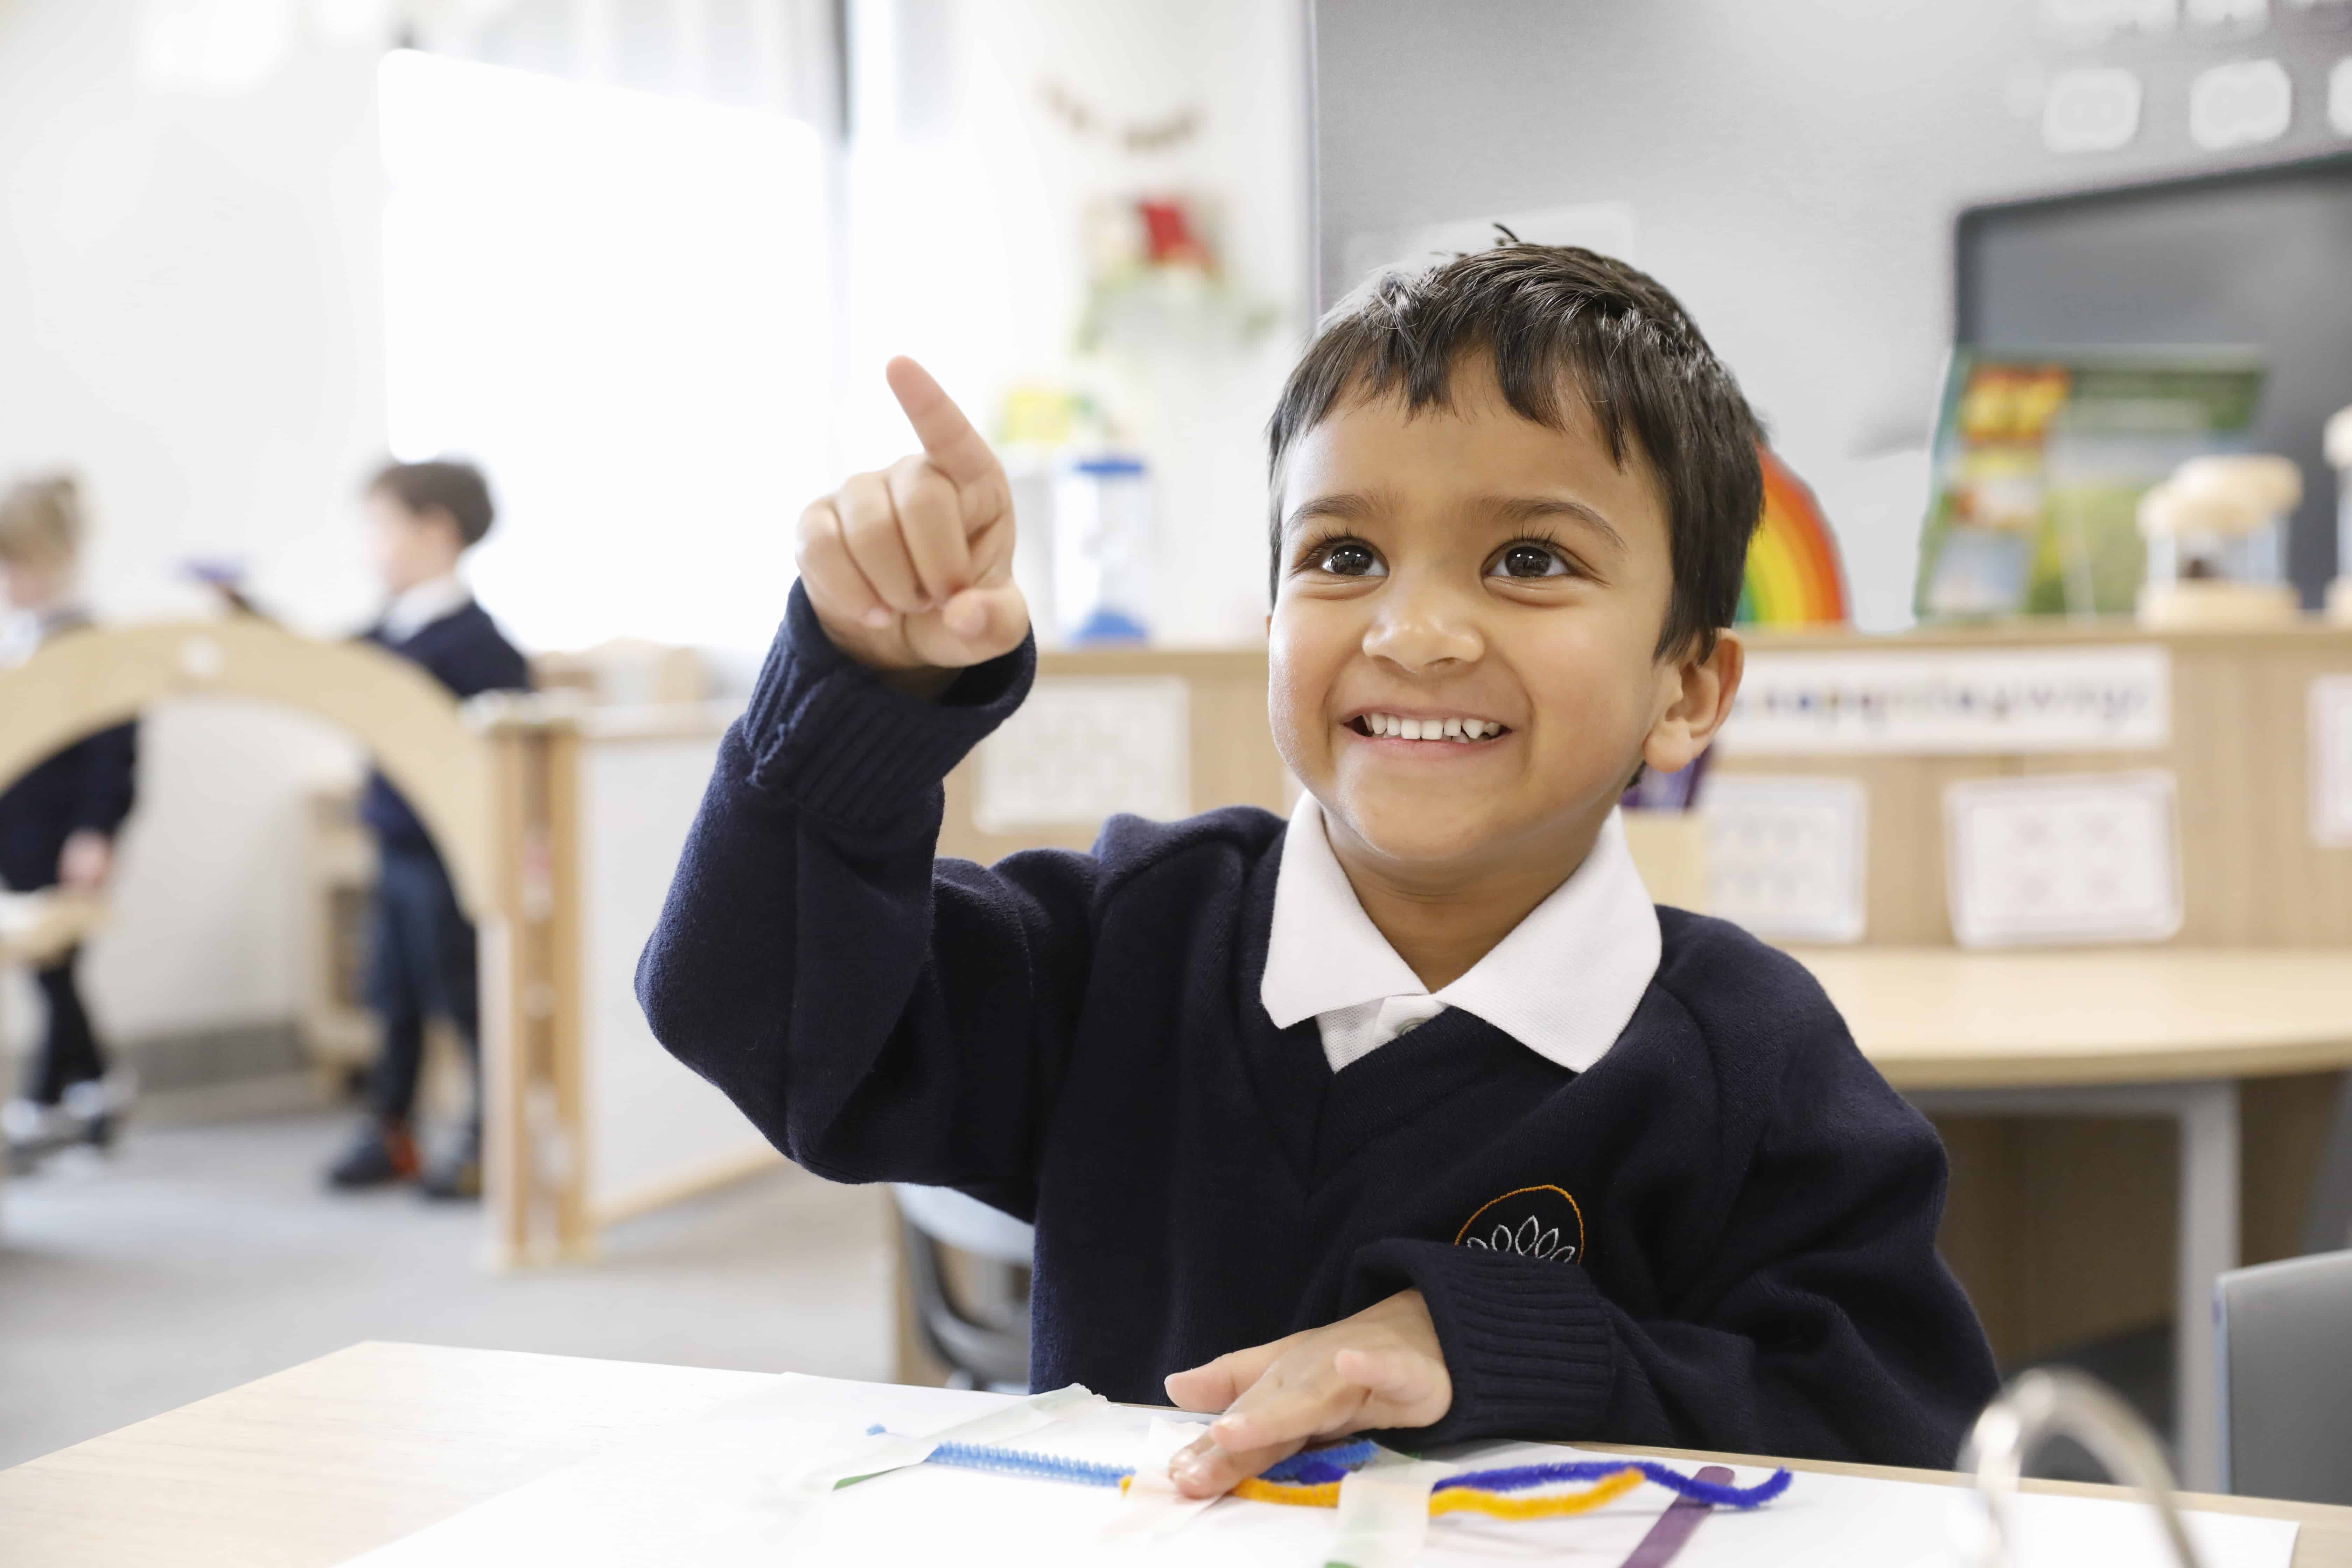 Image of Pre School pupil at Crown Street Primary School smiling with hand in the air whilst completing a craft activity.